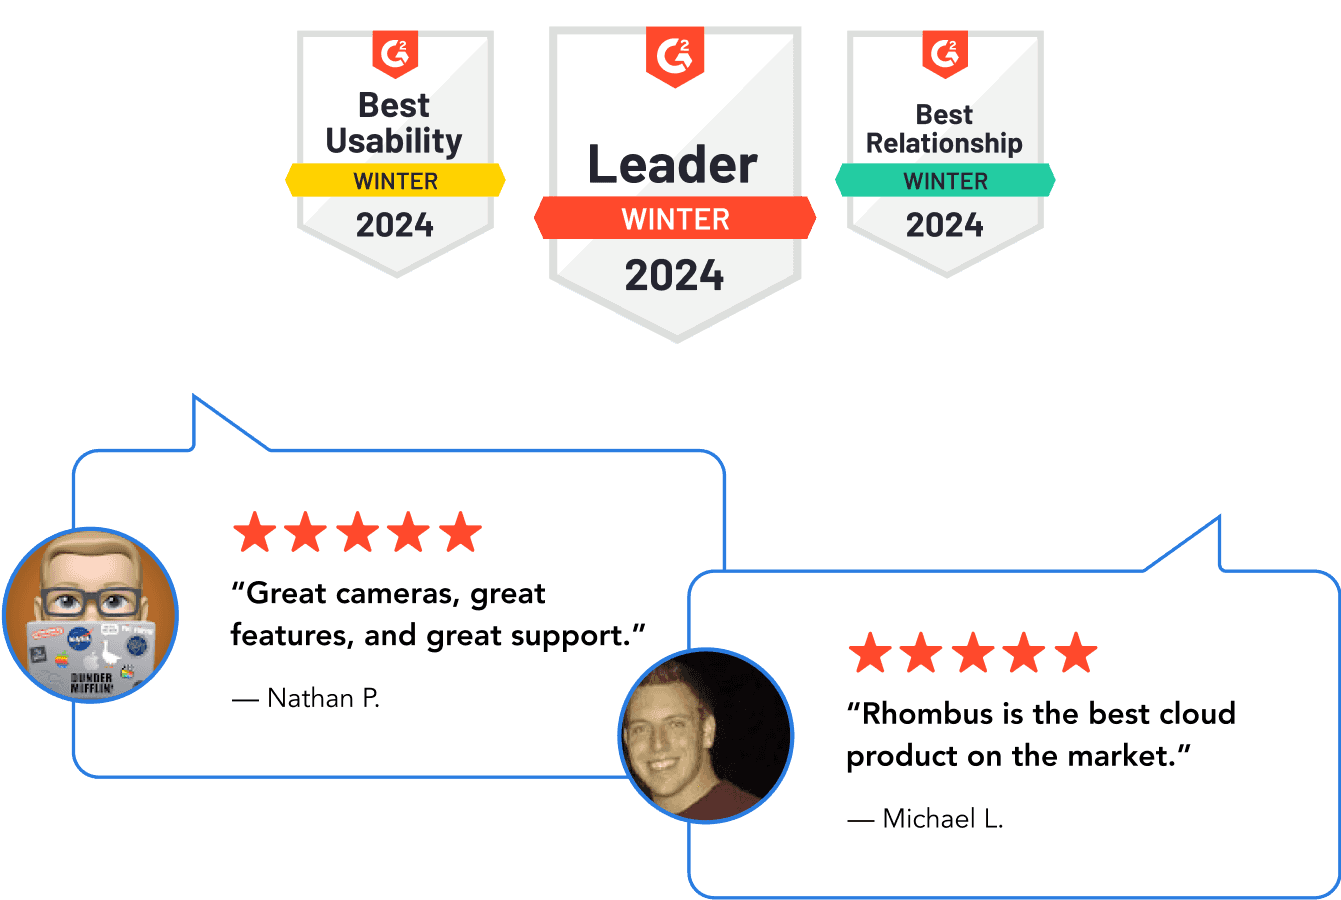 g2 badges for Best Usability, Leader and Best Results for Spring 2023